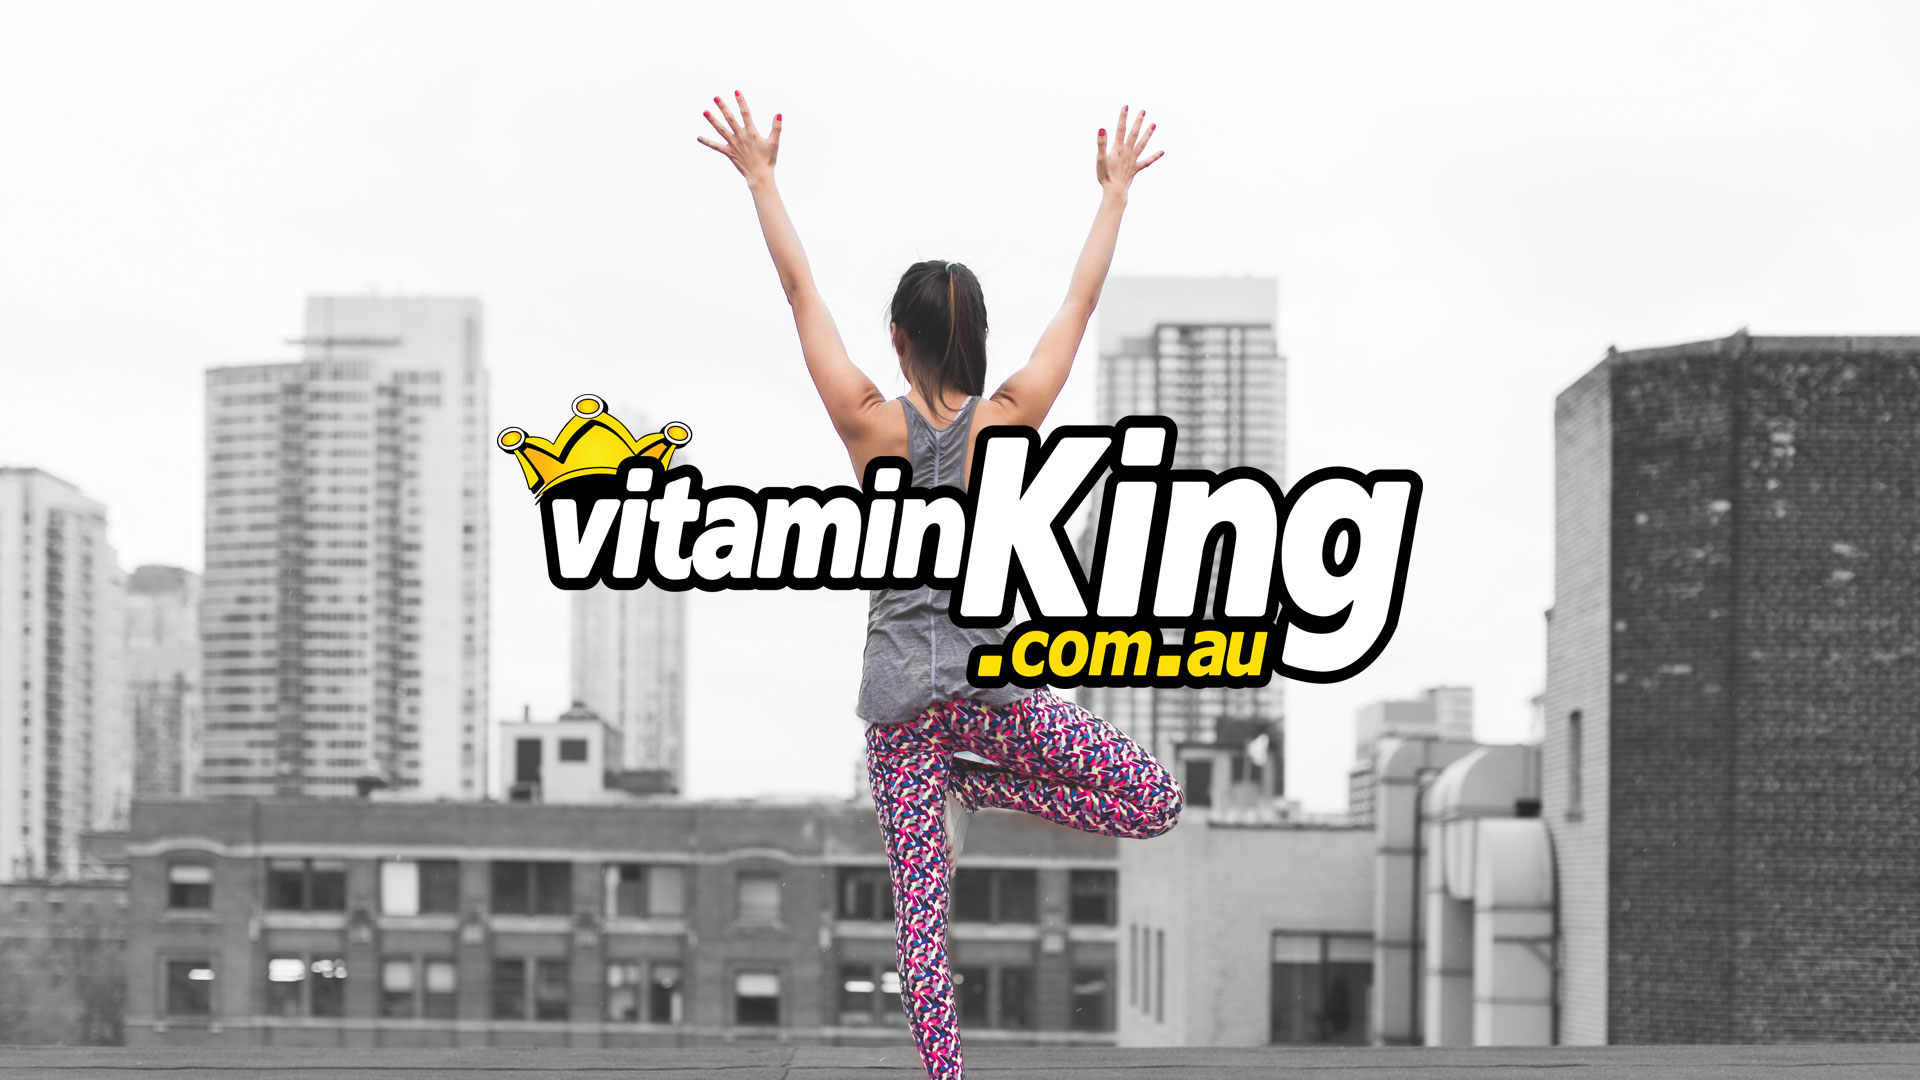 All Vitamin King Deals & Promotions